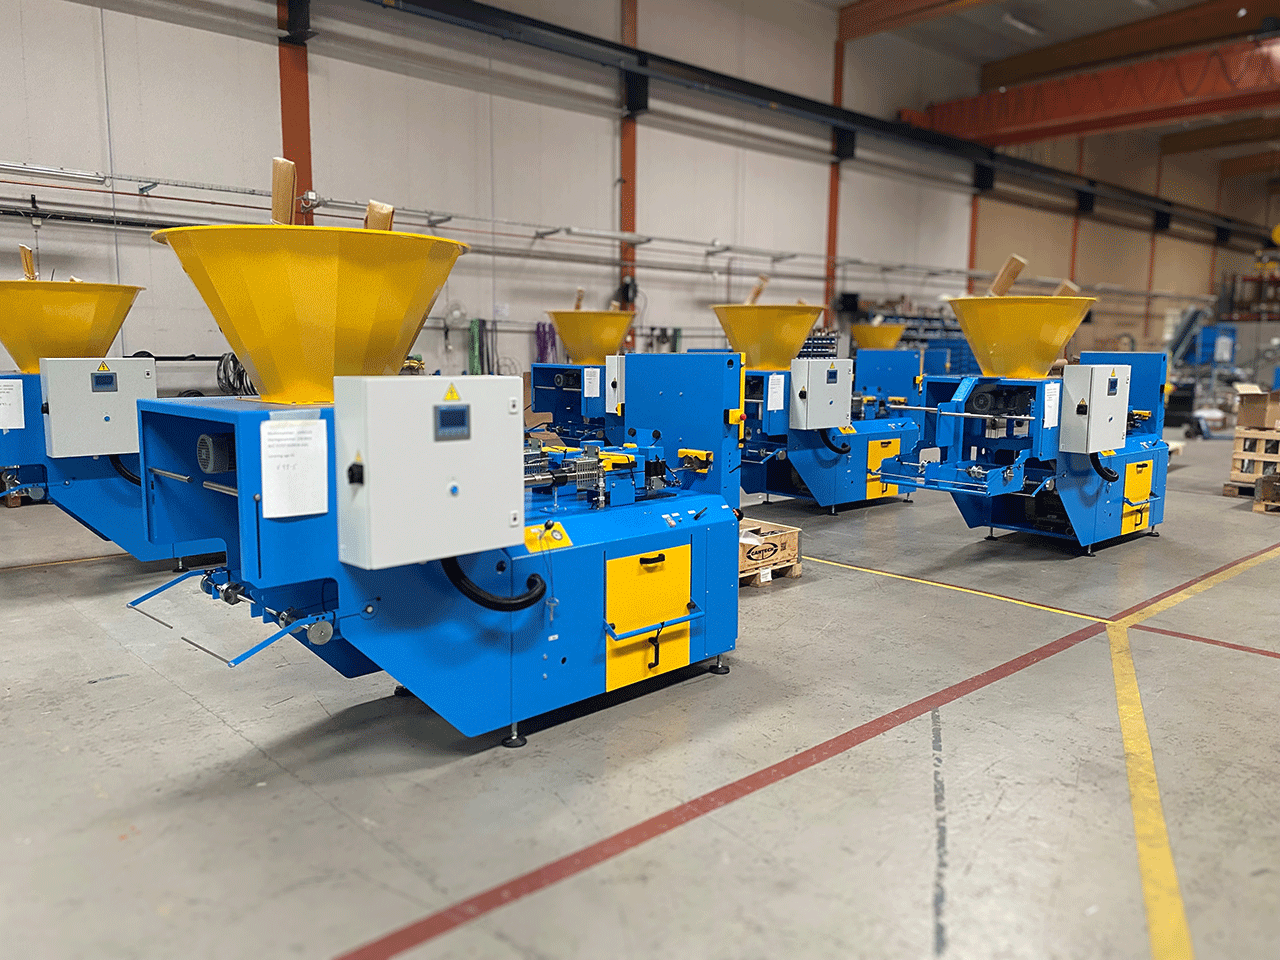 BCC FiberCell Filling machines in the work shop